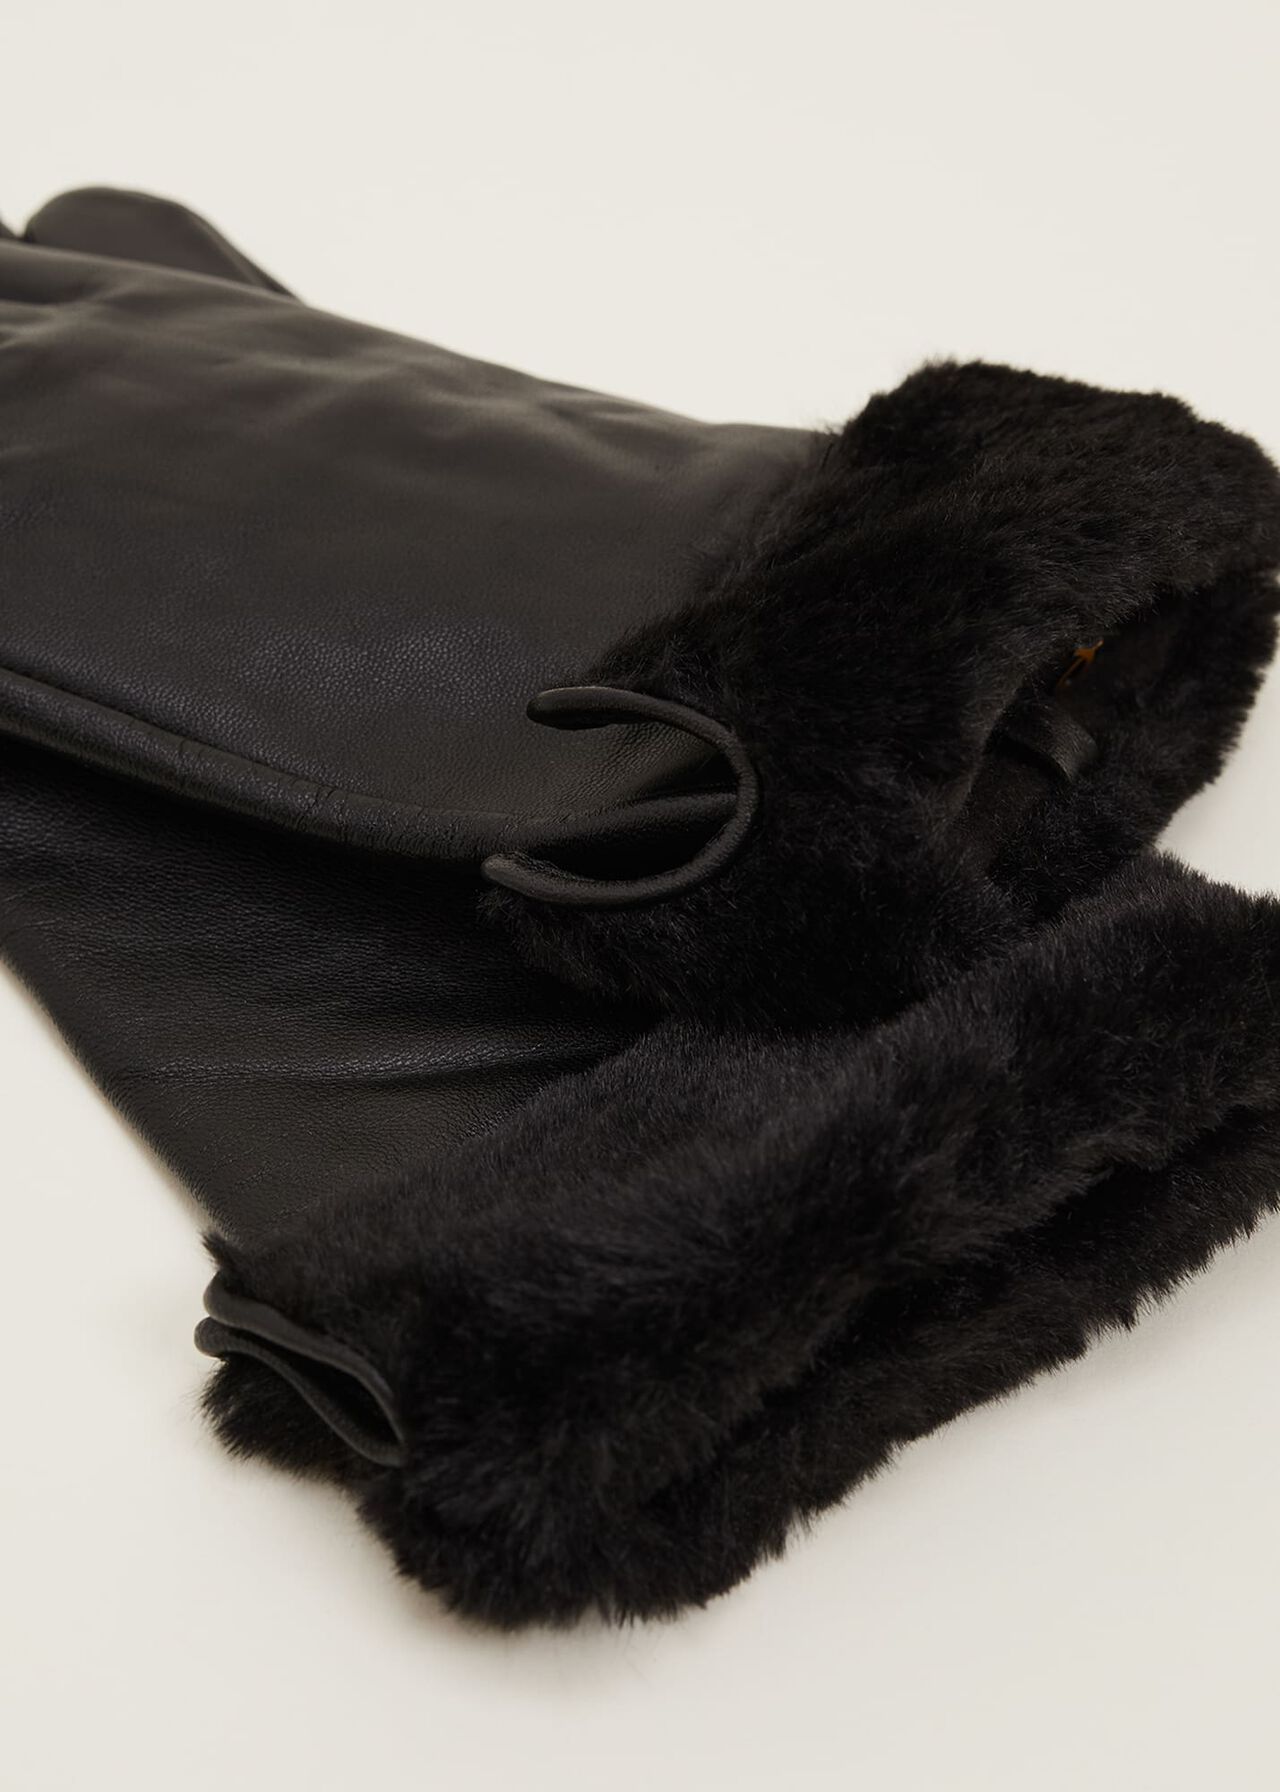 Faux Fur Trimmed Leather Gloves